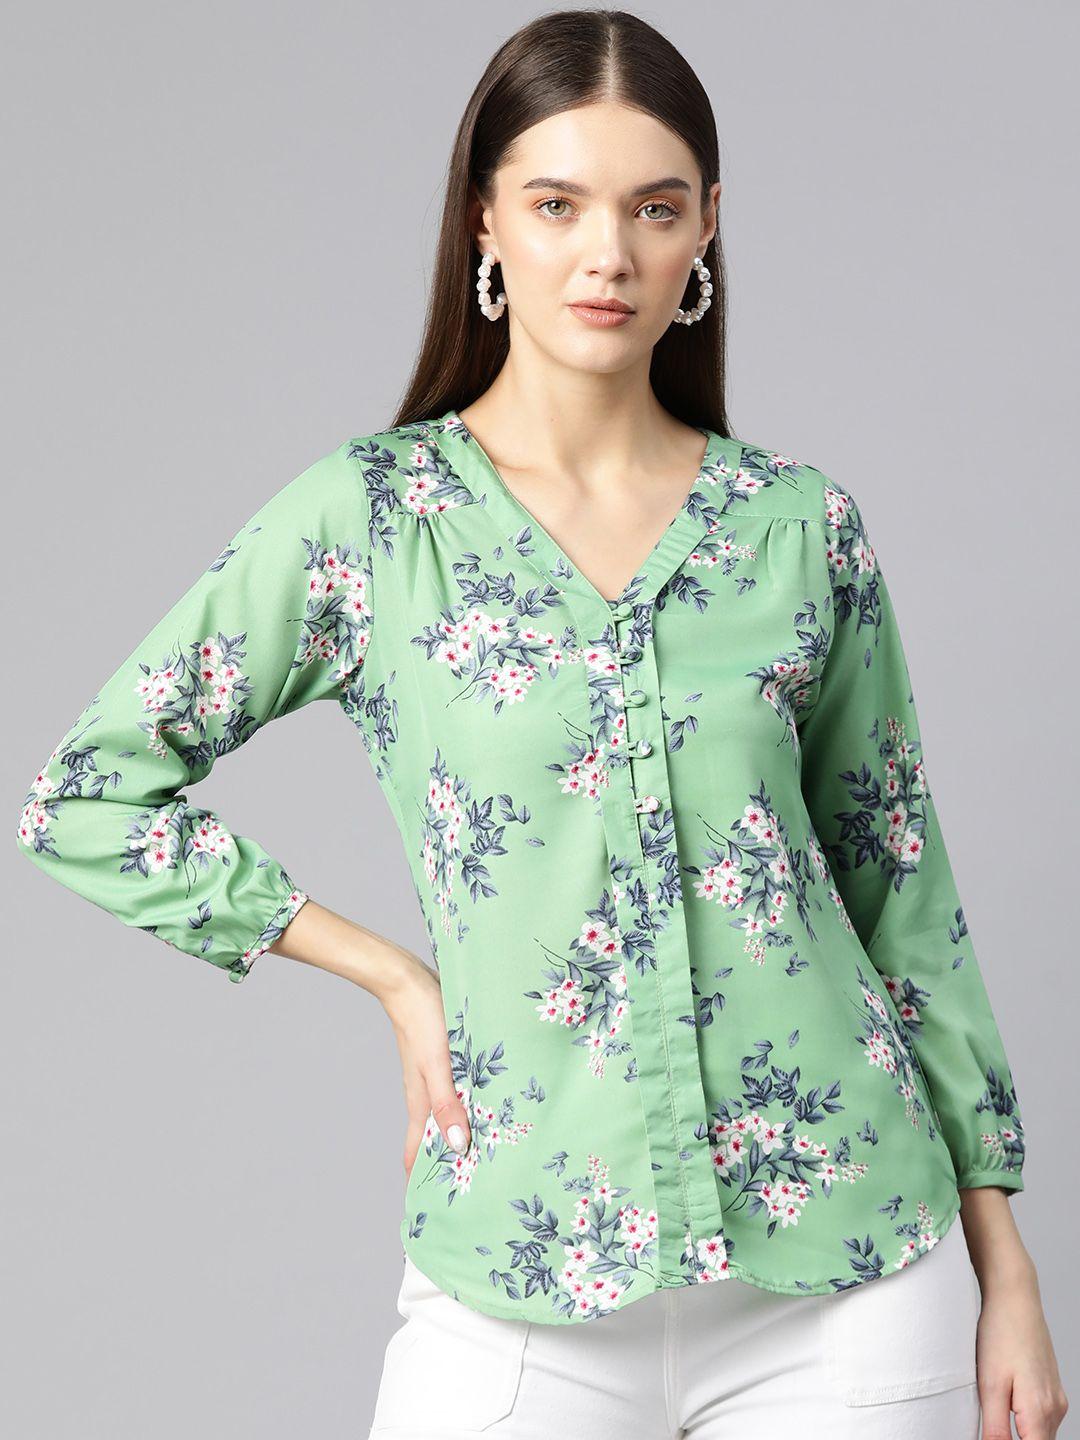 ives floral print puff sleeves crepe shirt style top